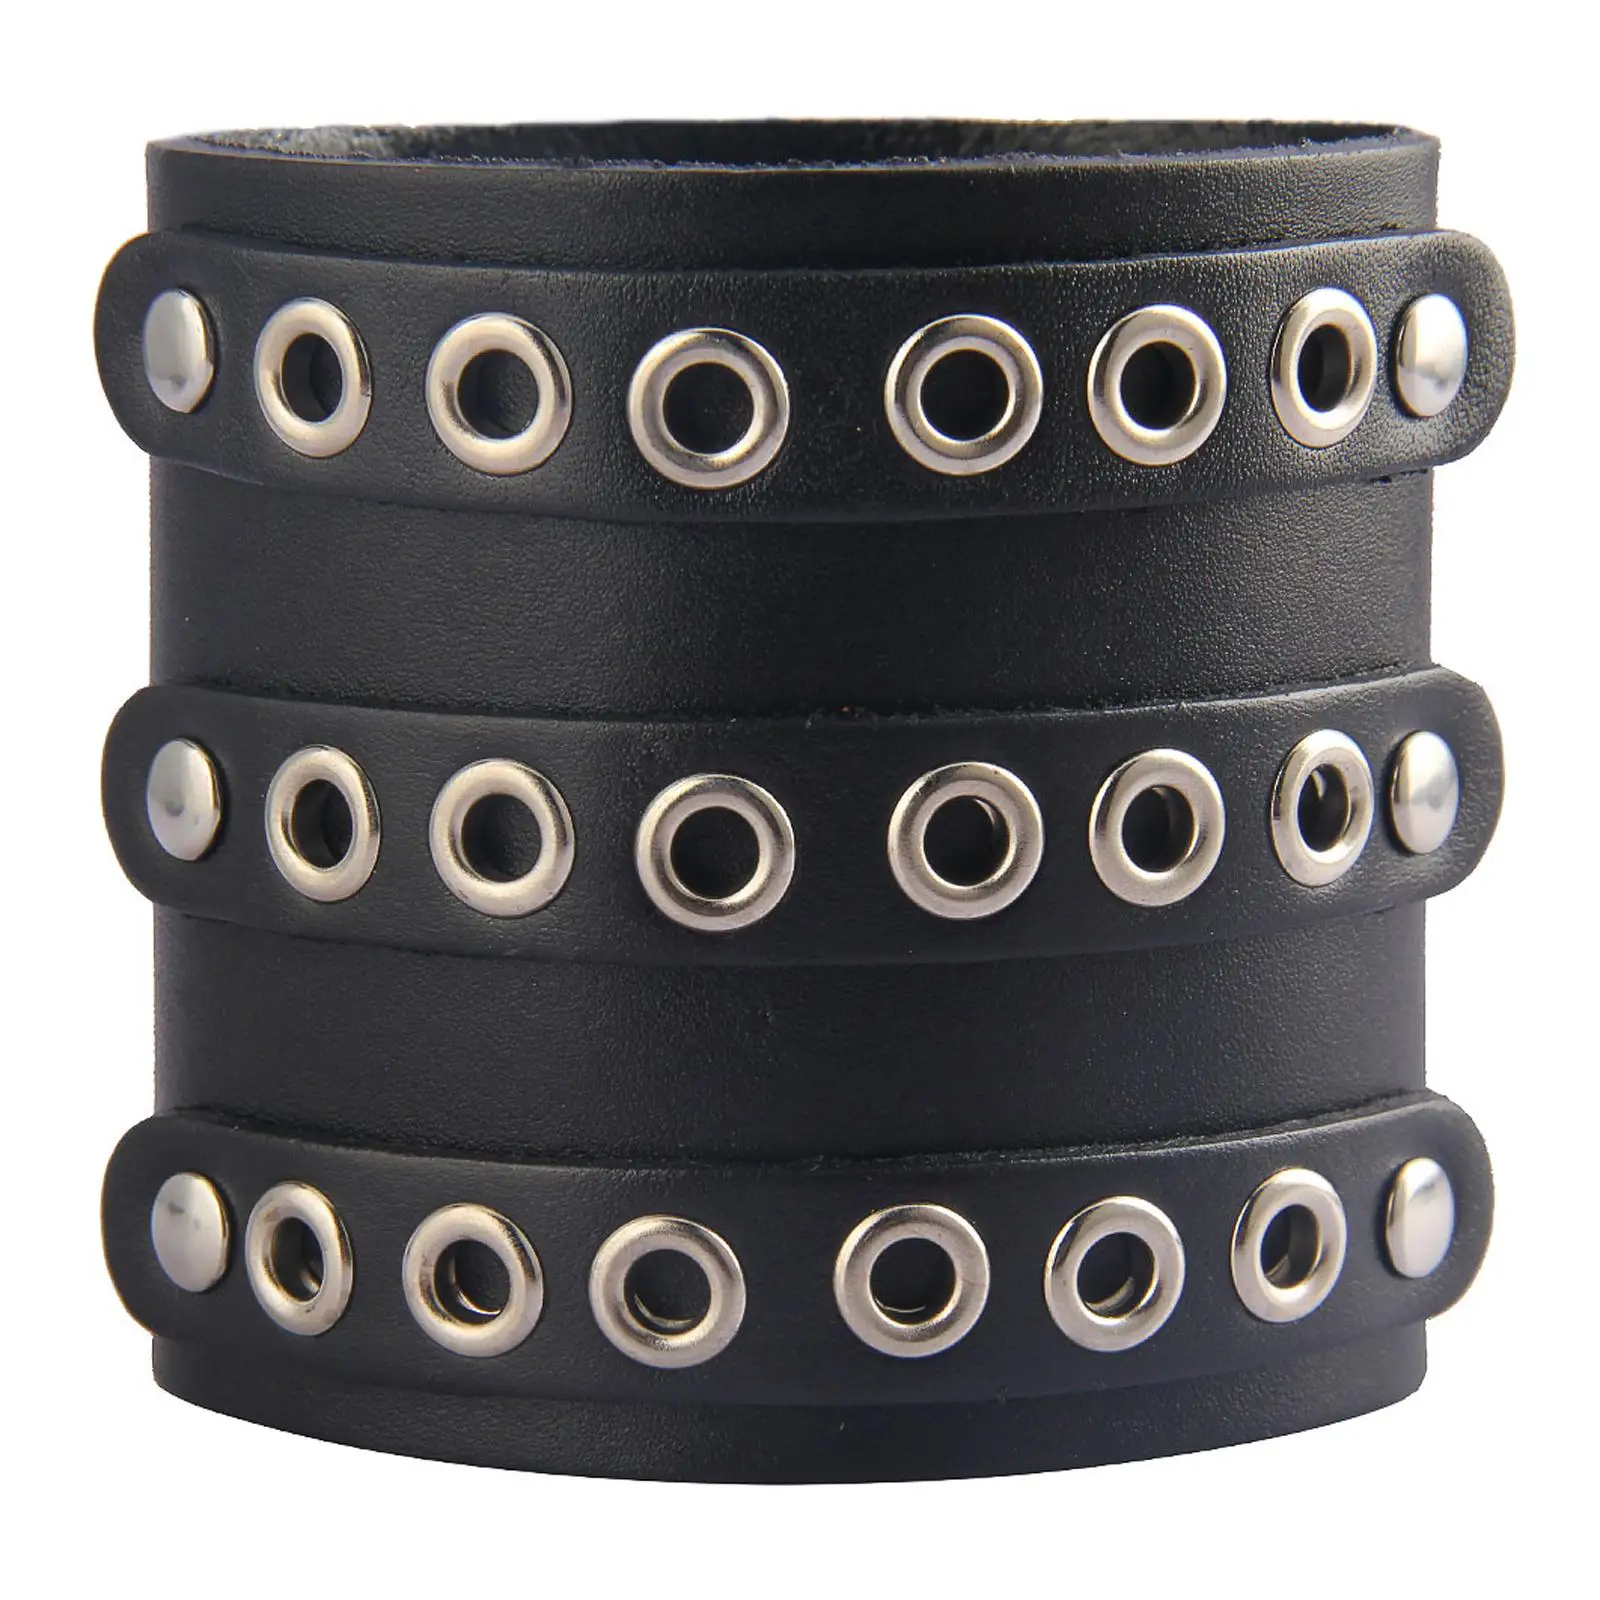 PU Leather Bracelet Three Rows of Holes Vintage Wide for Daily Party Men